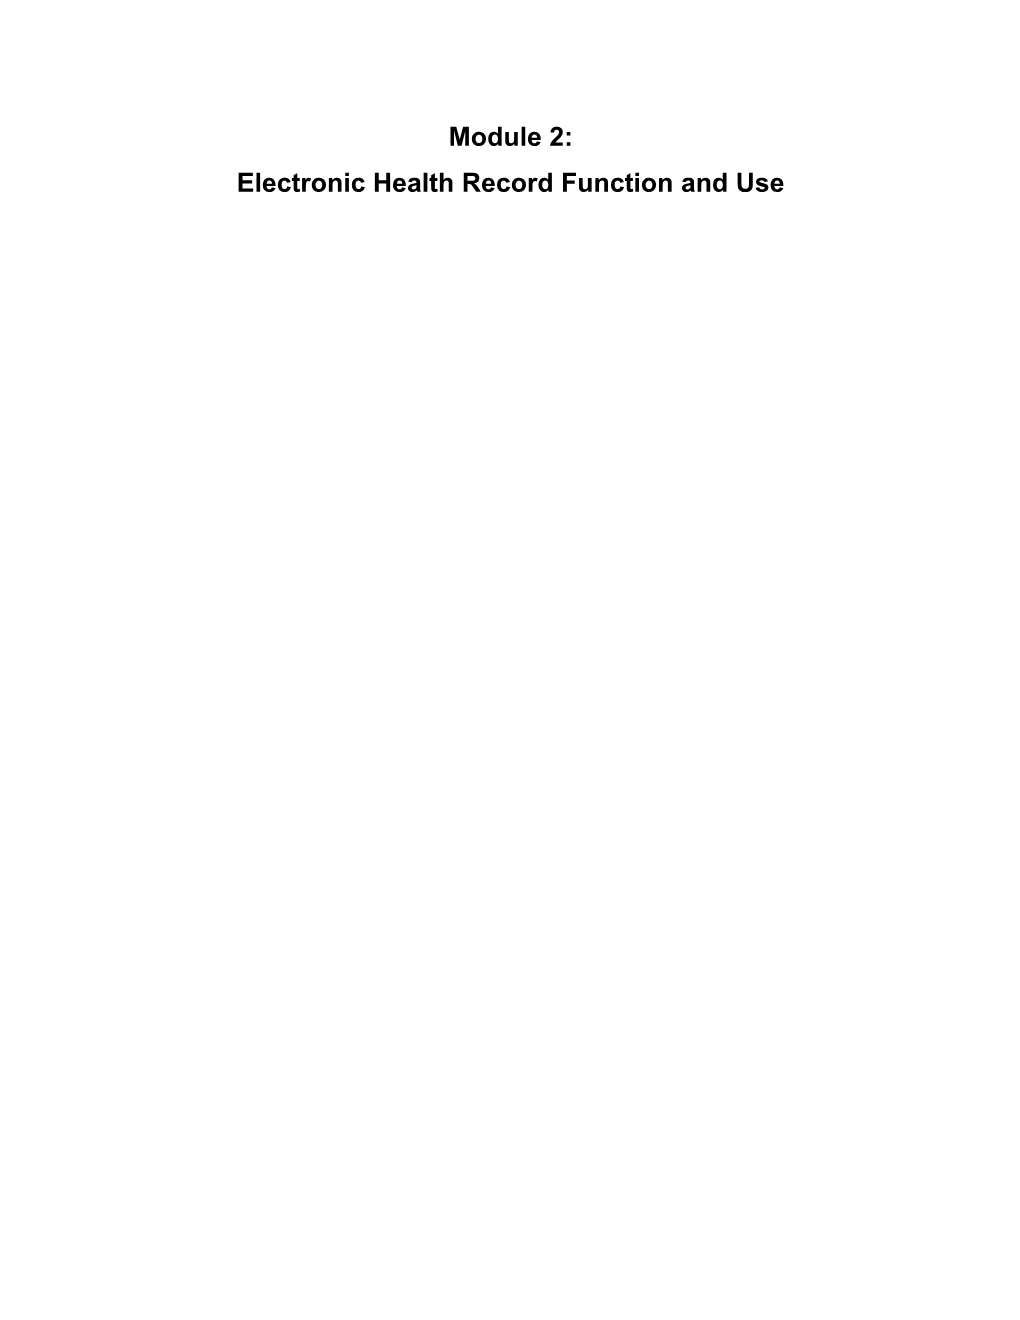 Electronic Health Record Function and Use